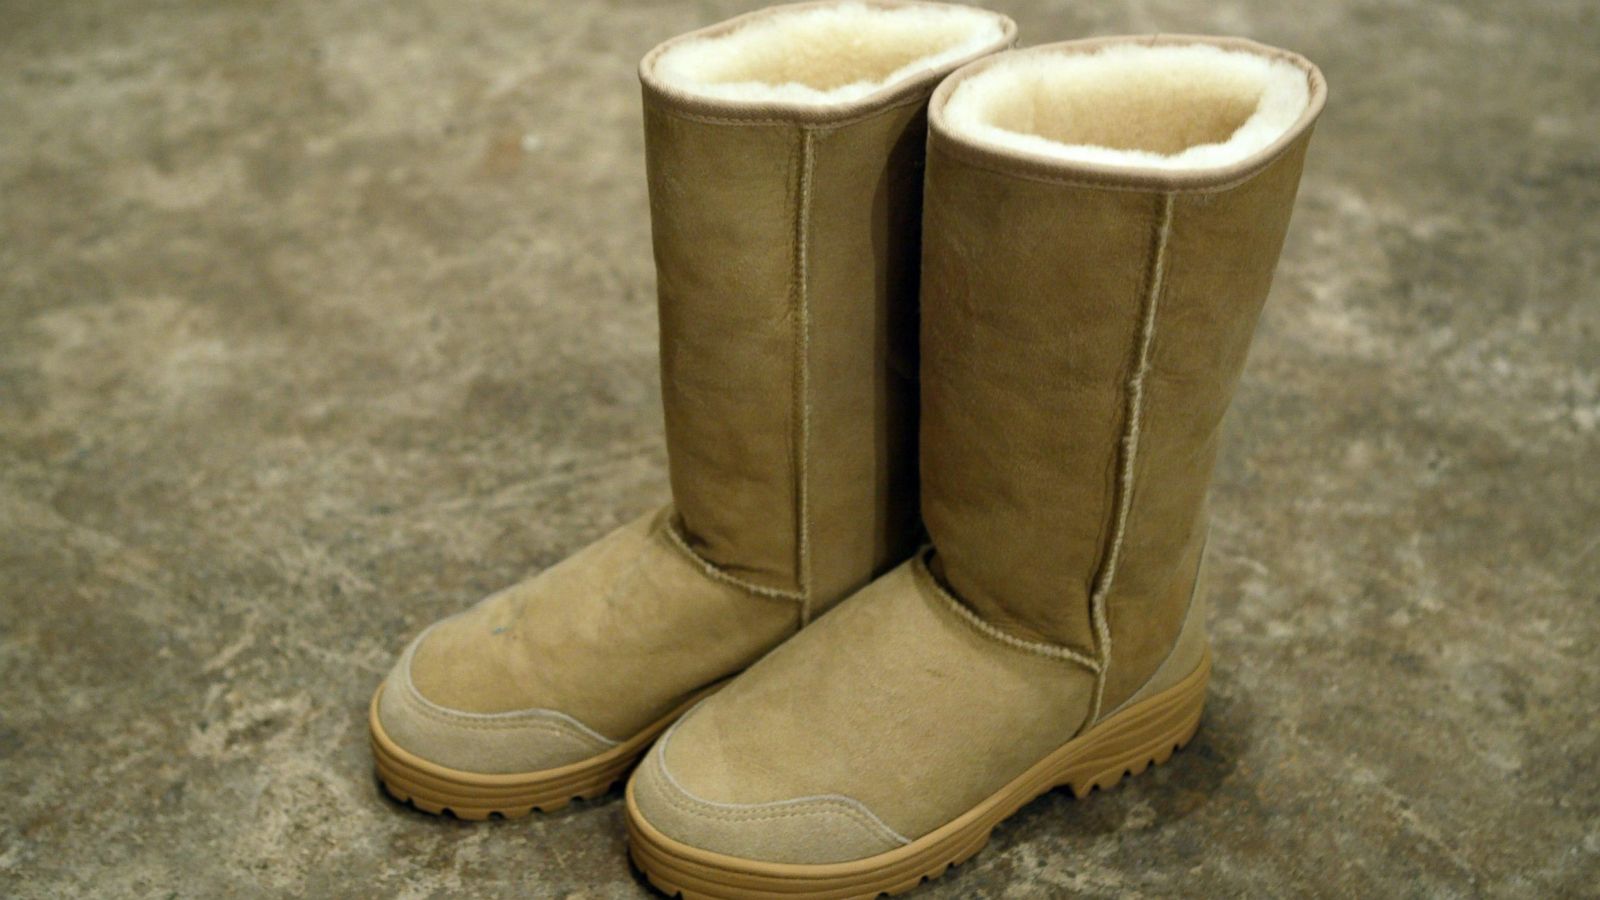 Buyer Beware: How to Spot, Avoid Counterfeit UGG Boots This Holiday Shopping Season ABC News